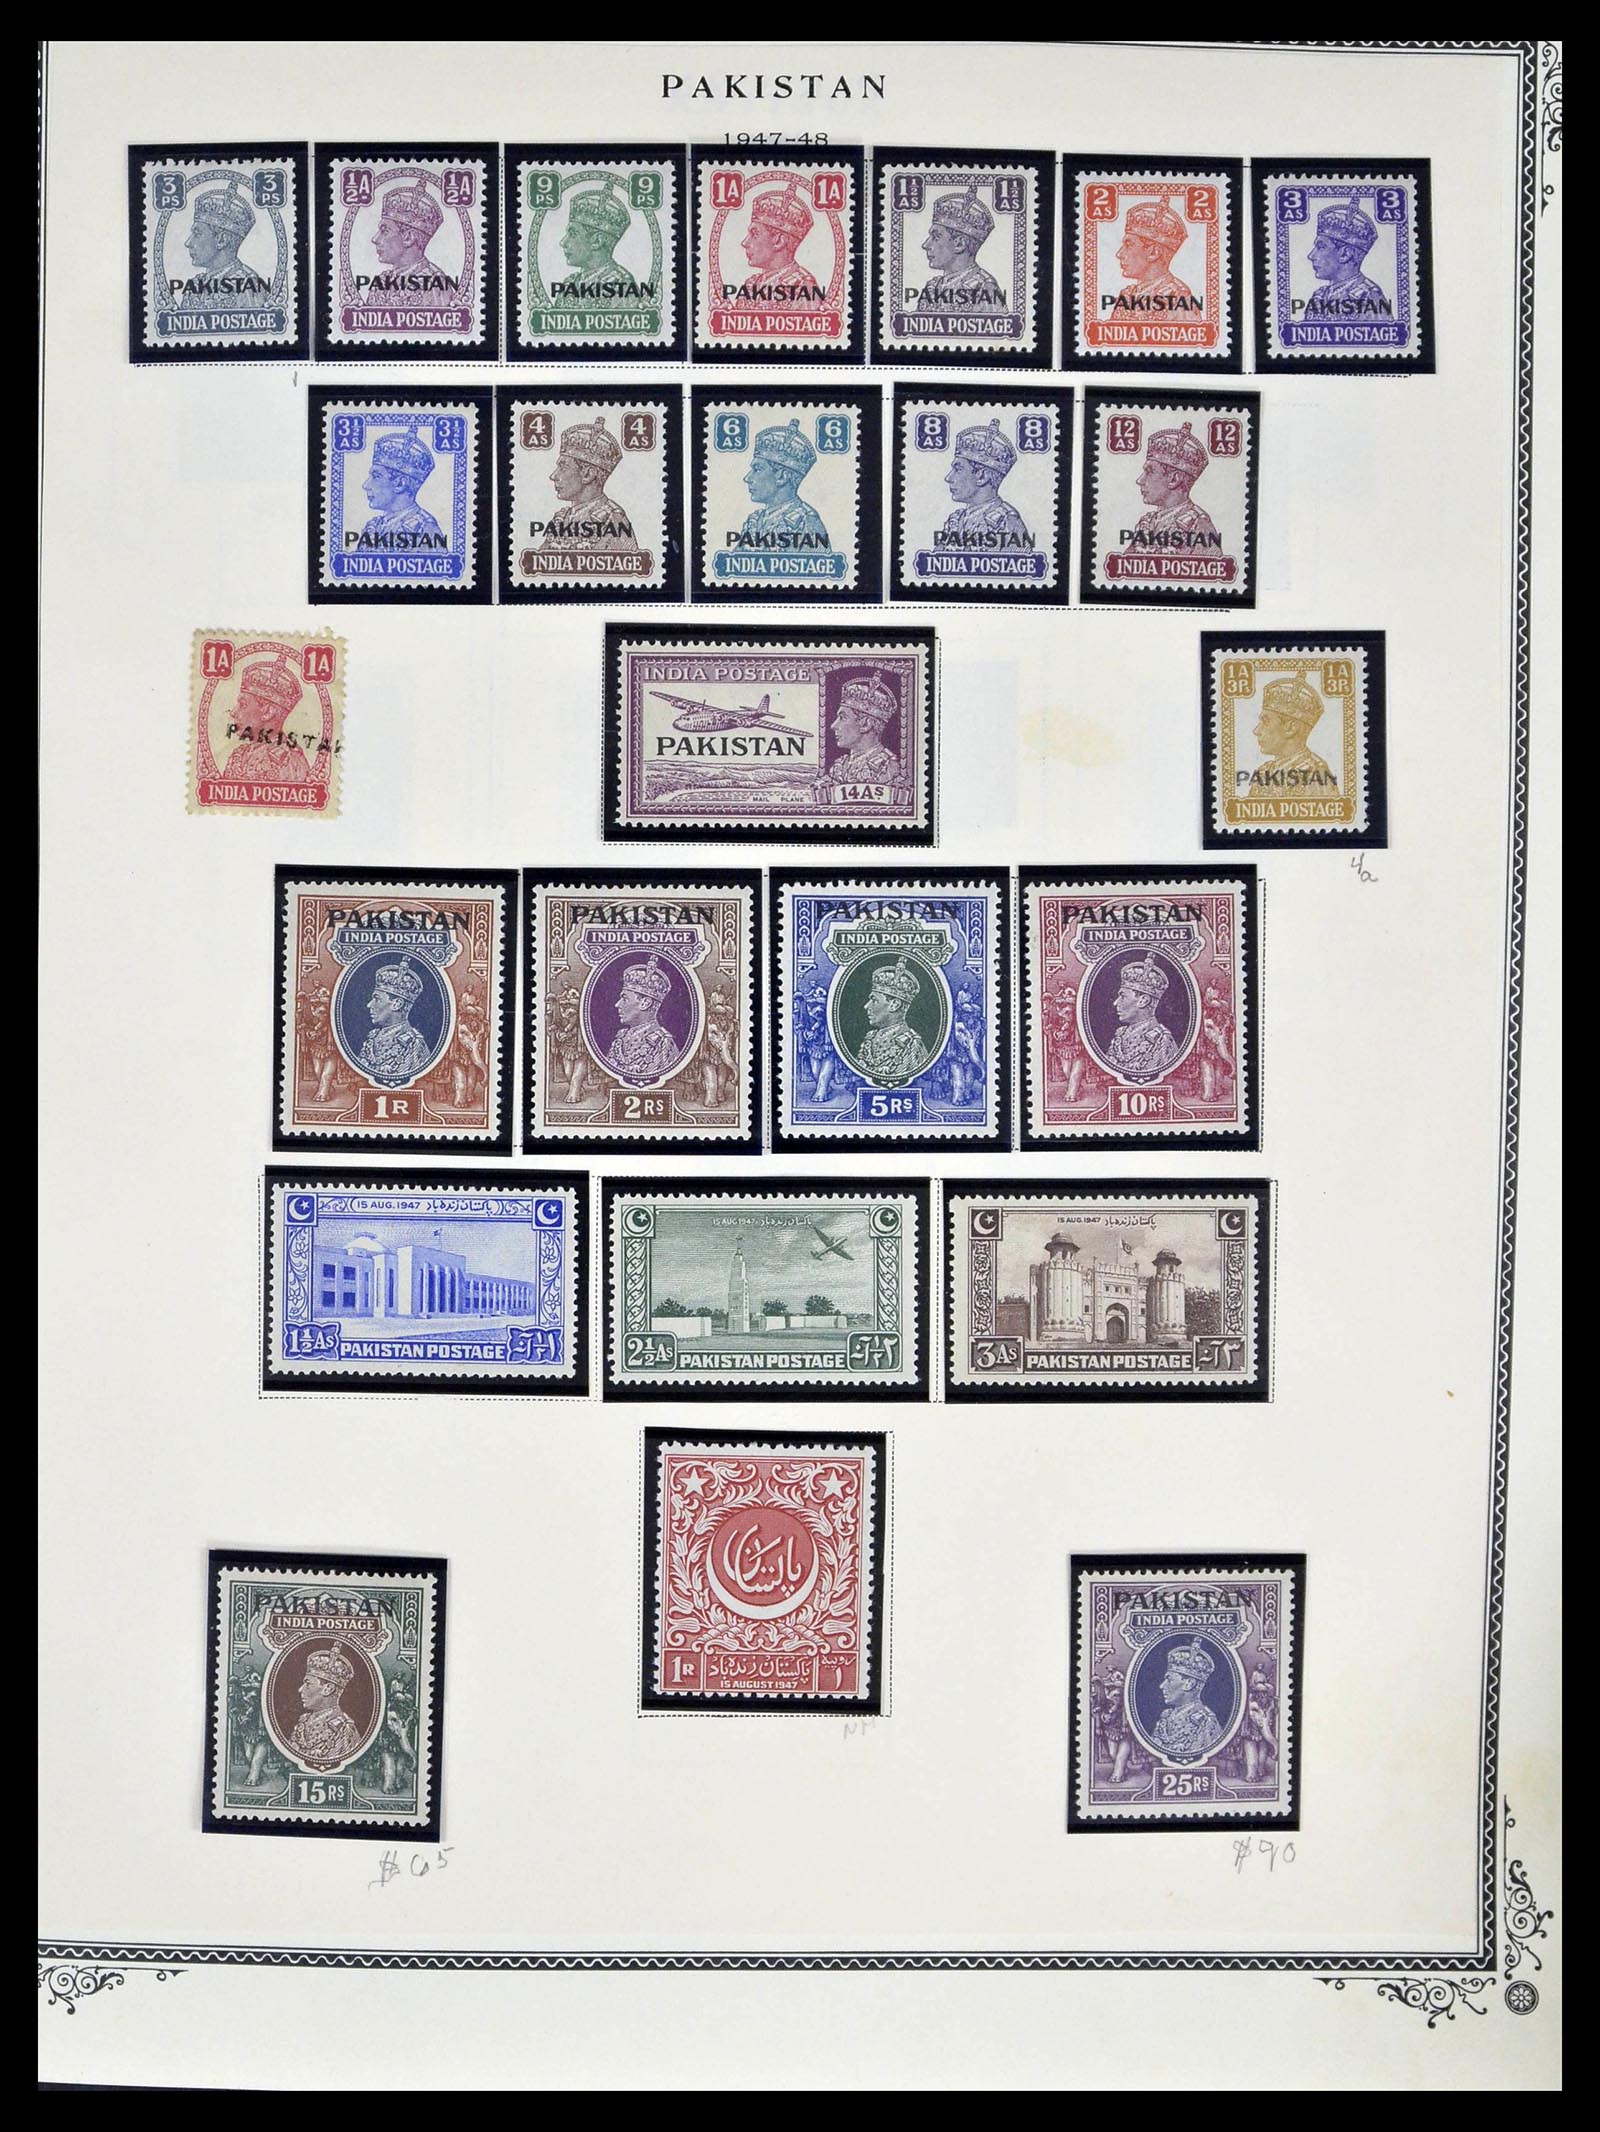 39177 0002 - Stamp collection 39177 Pakistan 1947-1980.